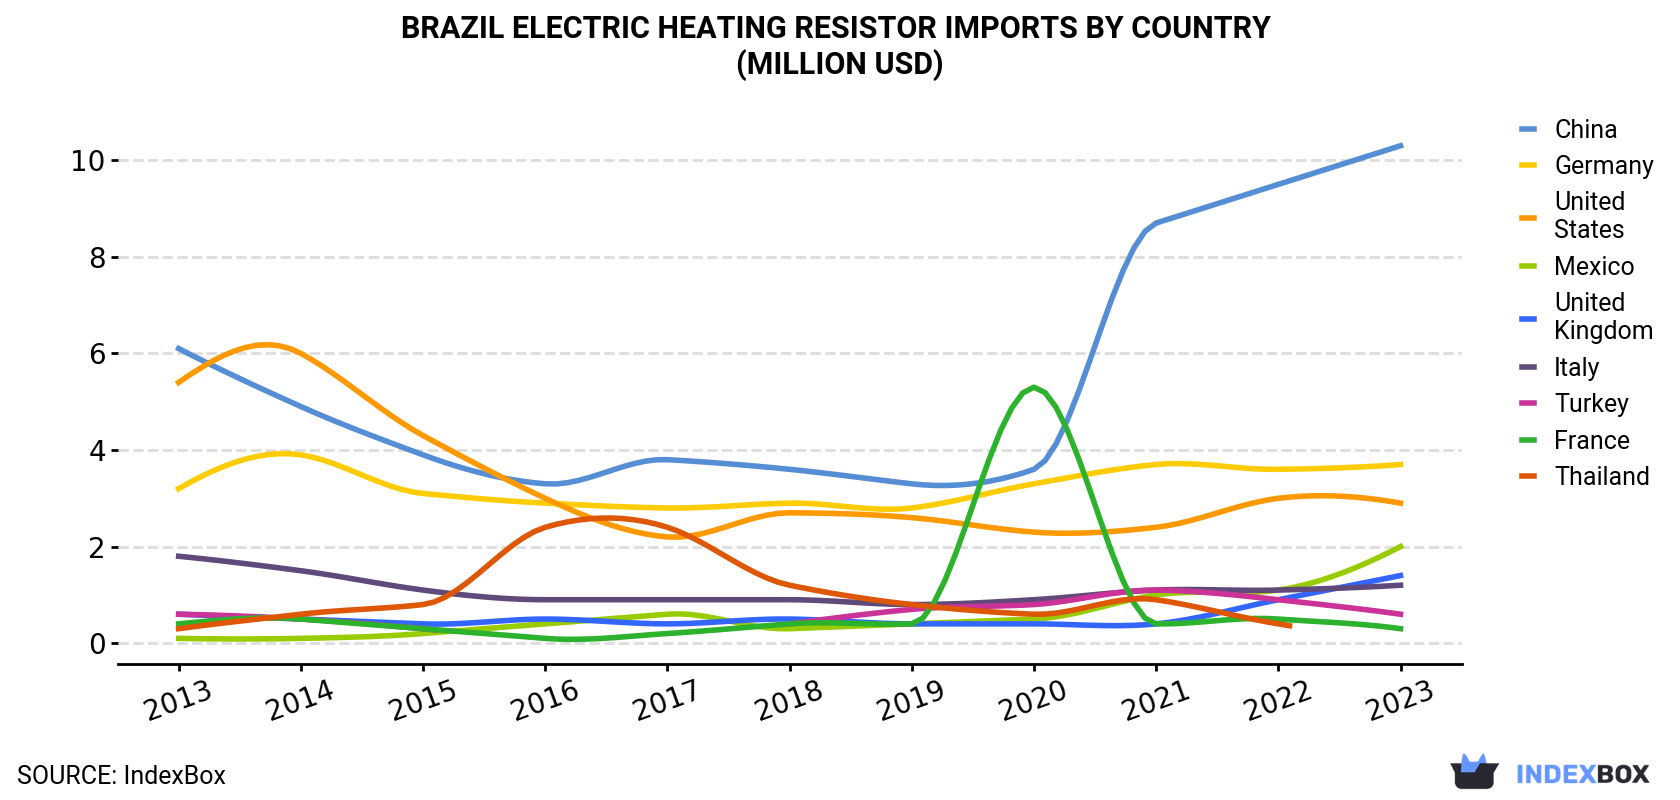 Brazil Electric Heating Resistor Imports By Country (Million USD)